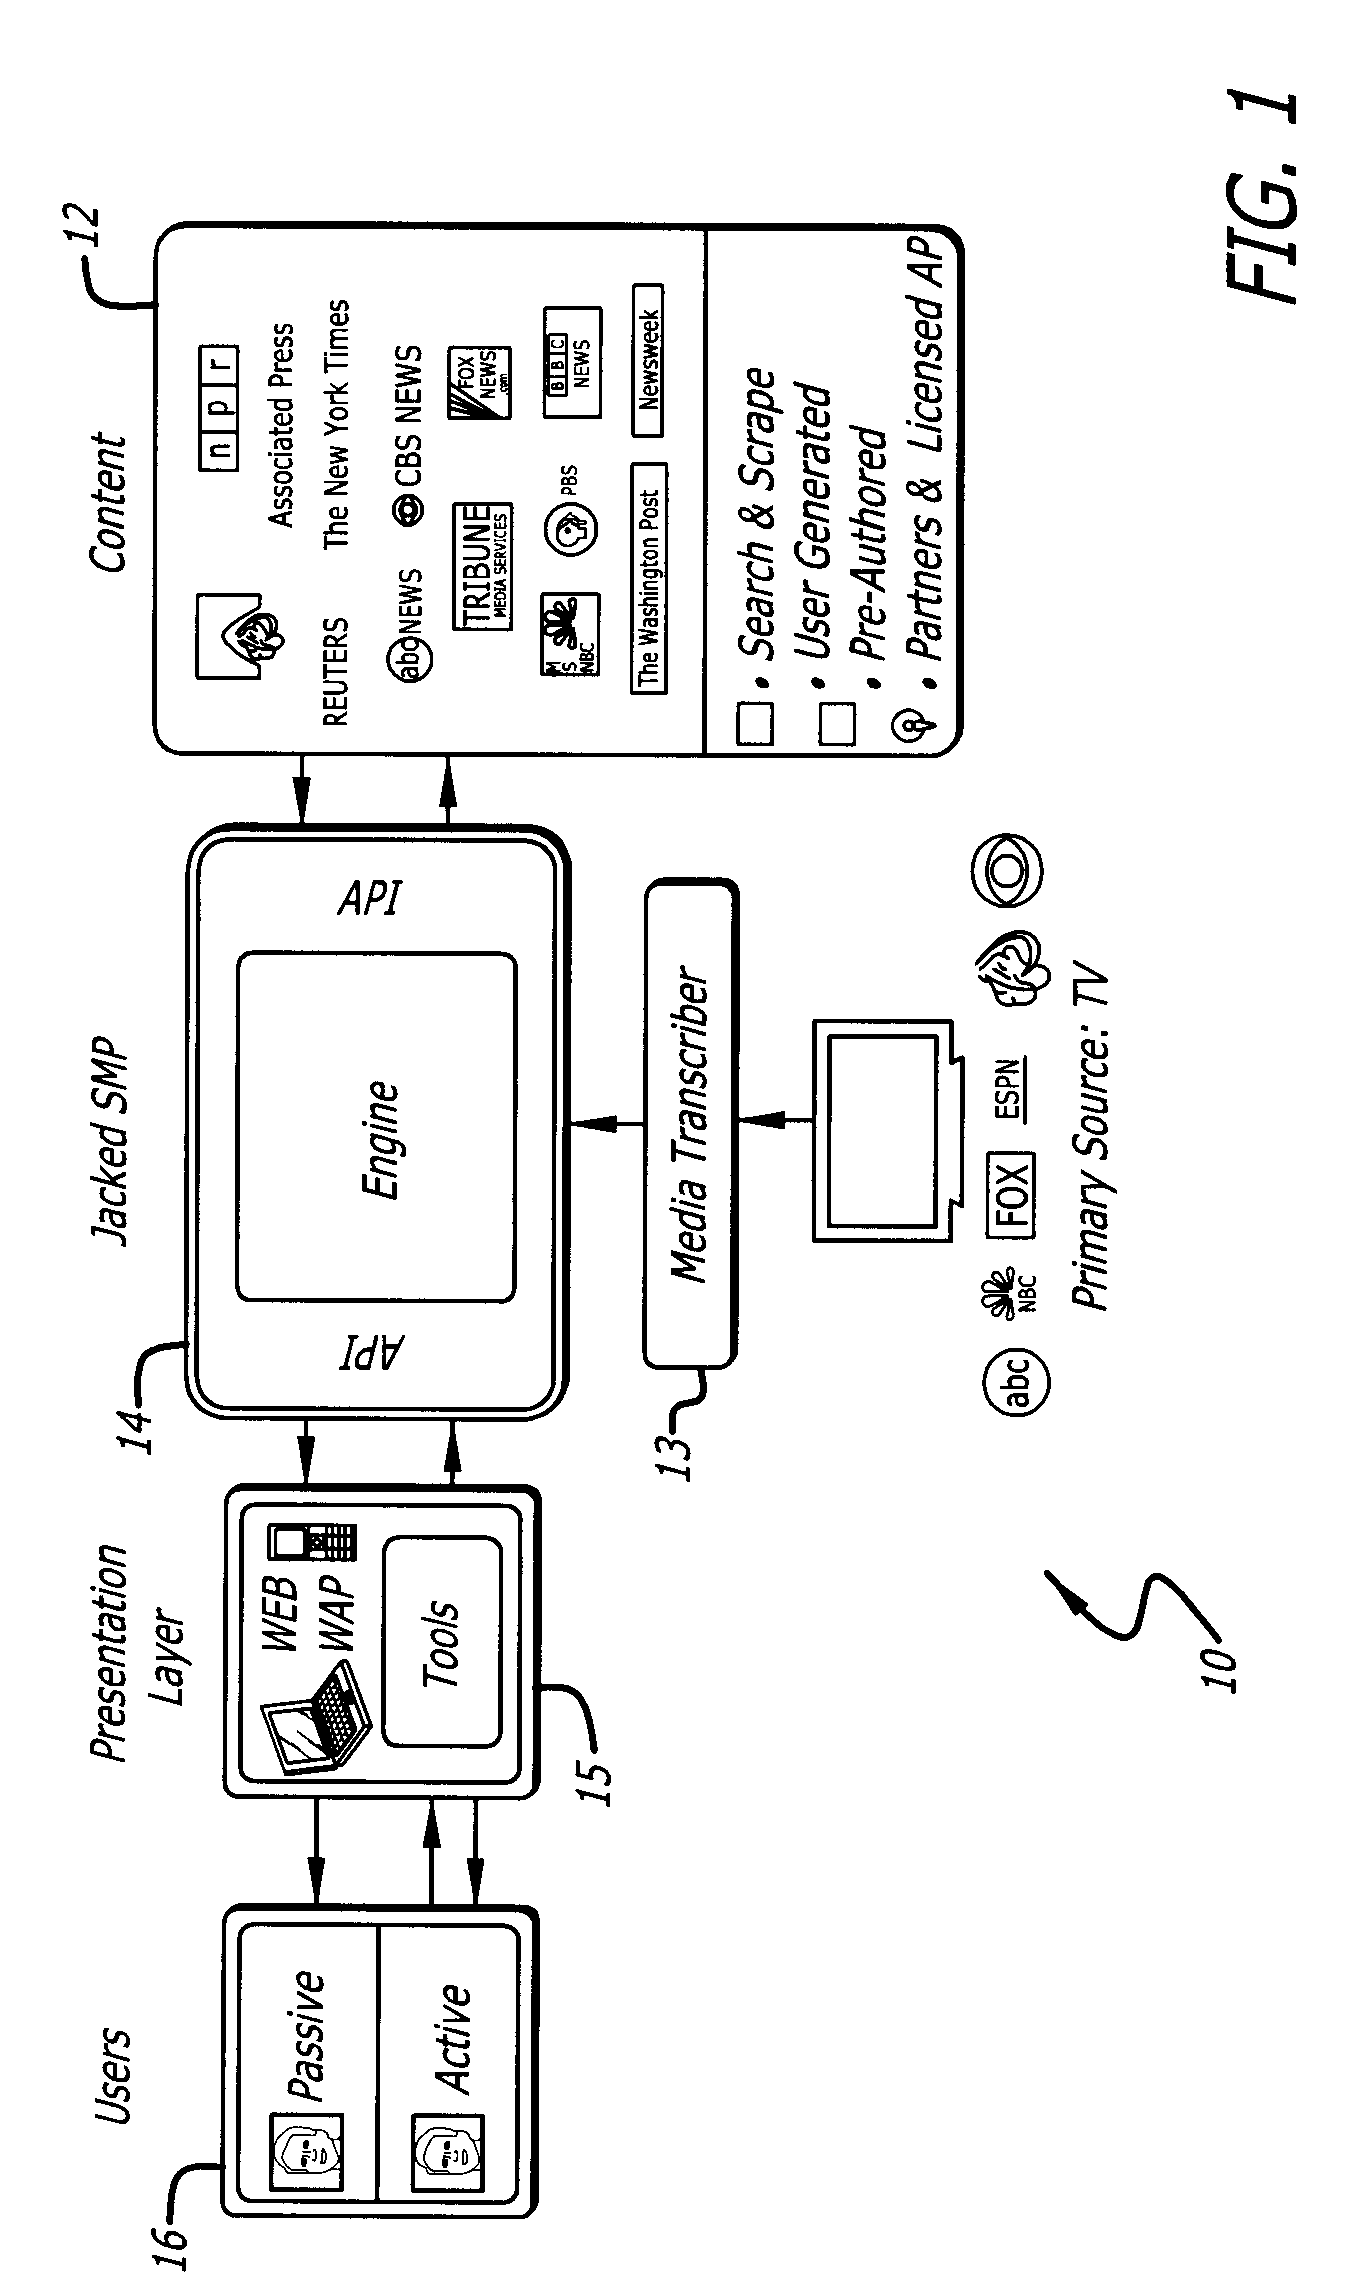 System for providing promotional content as part of secondary content associated with a primary broadcast